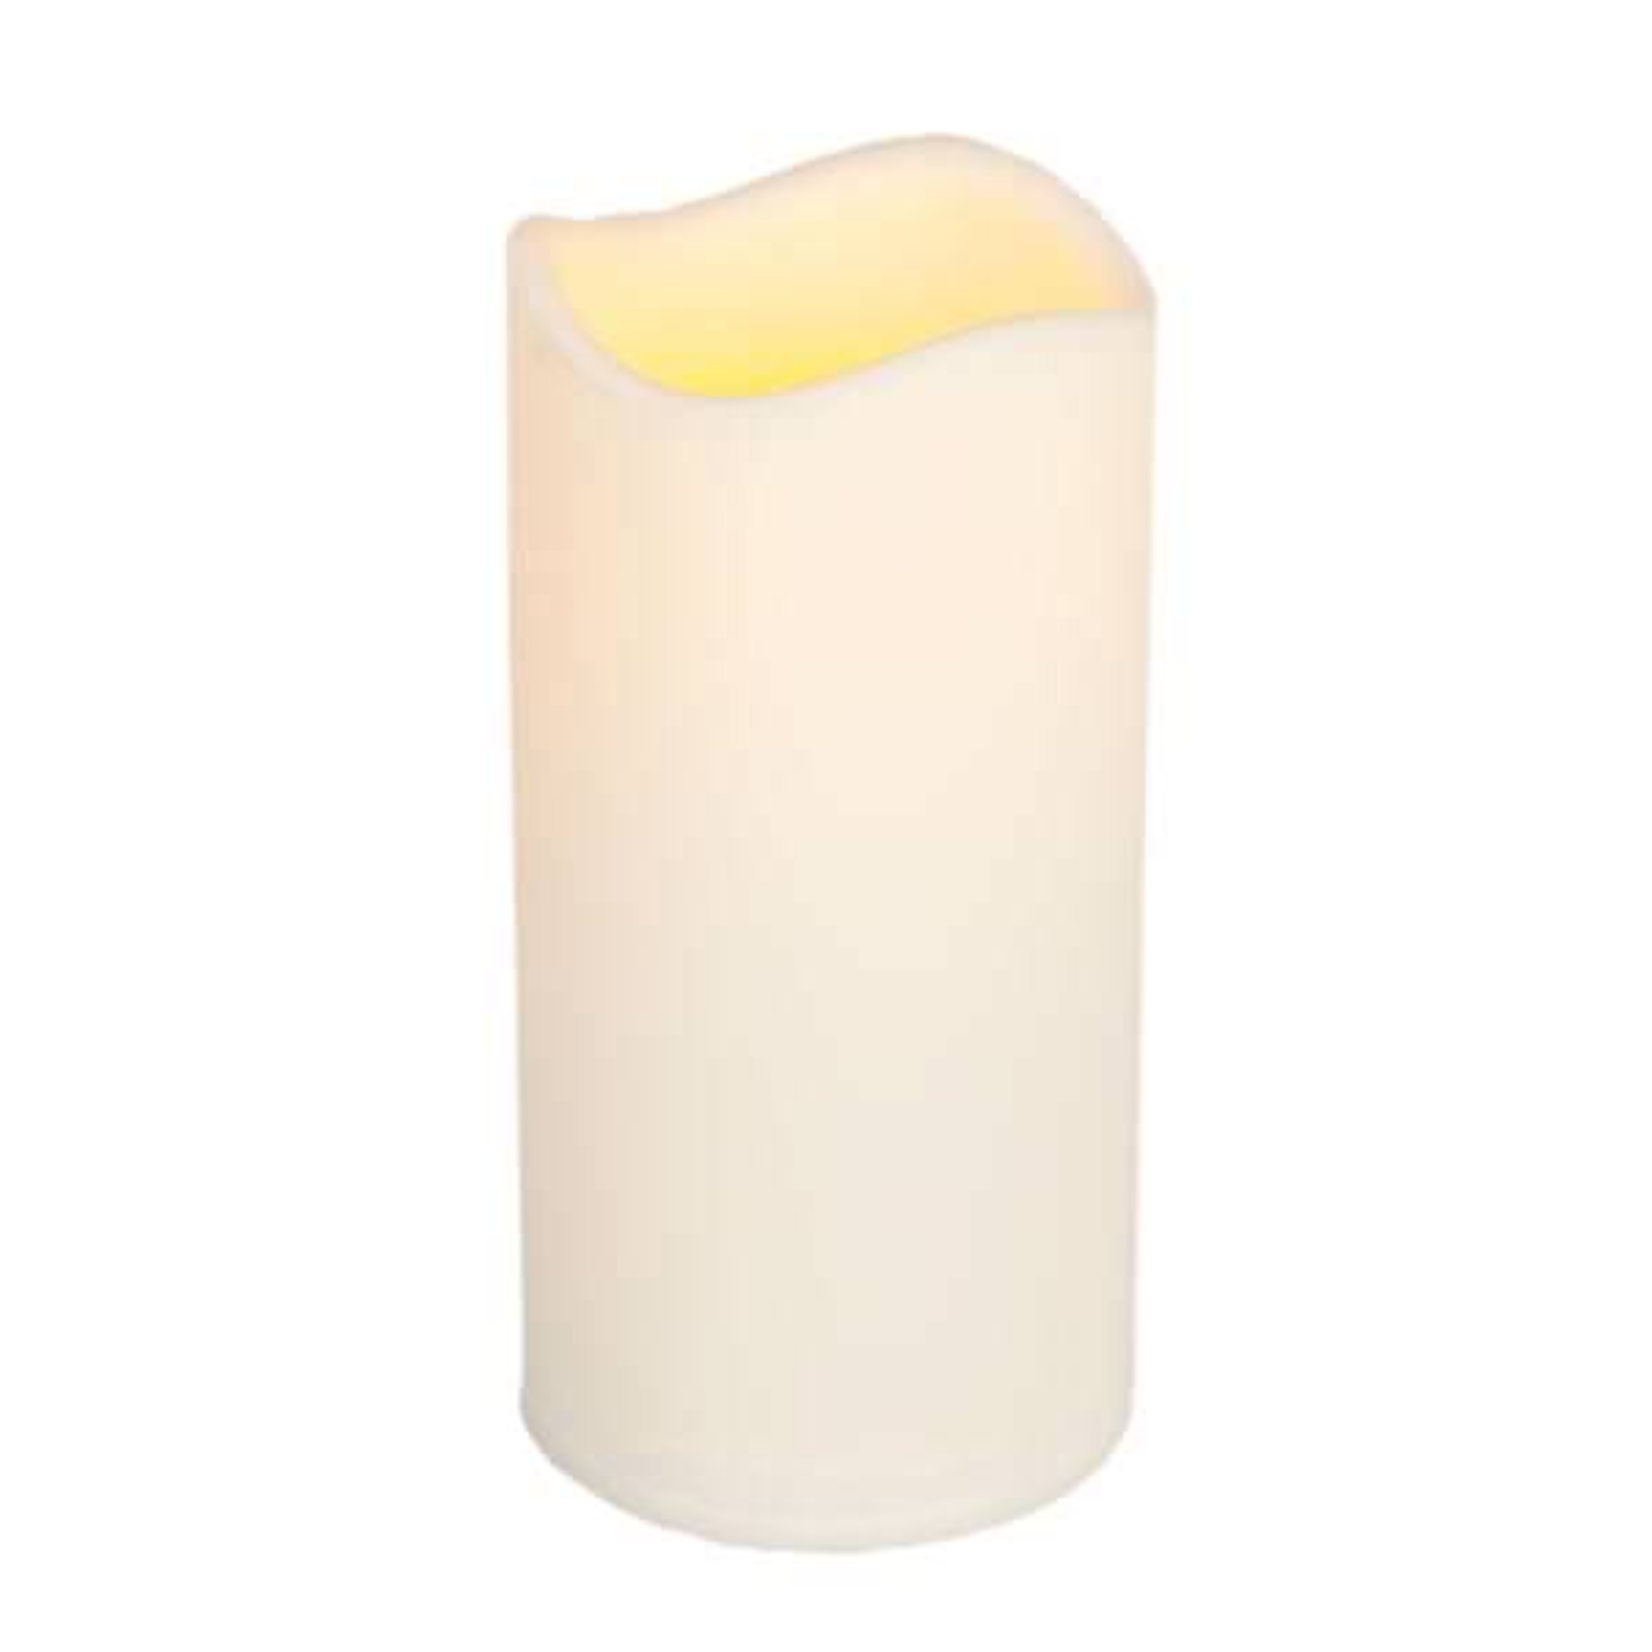 Everlasting Glow LED Resin Candle, Battery Operated